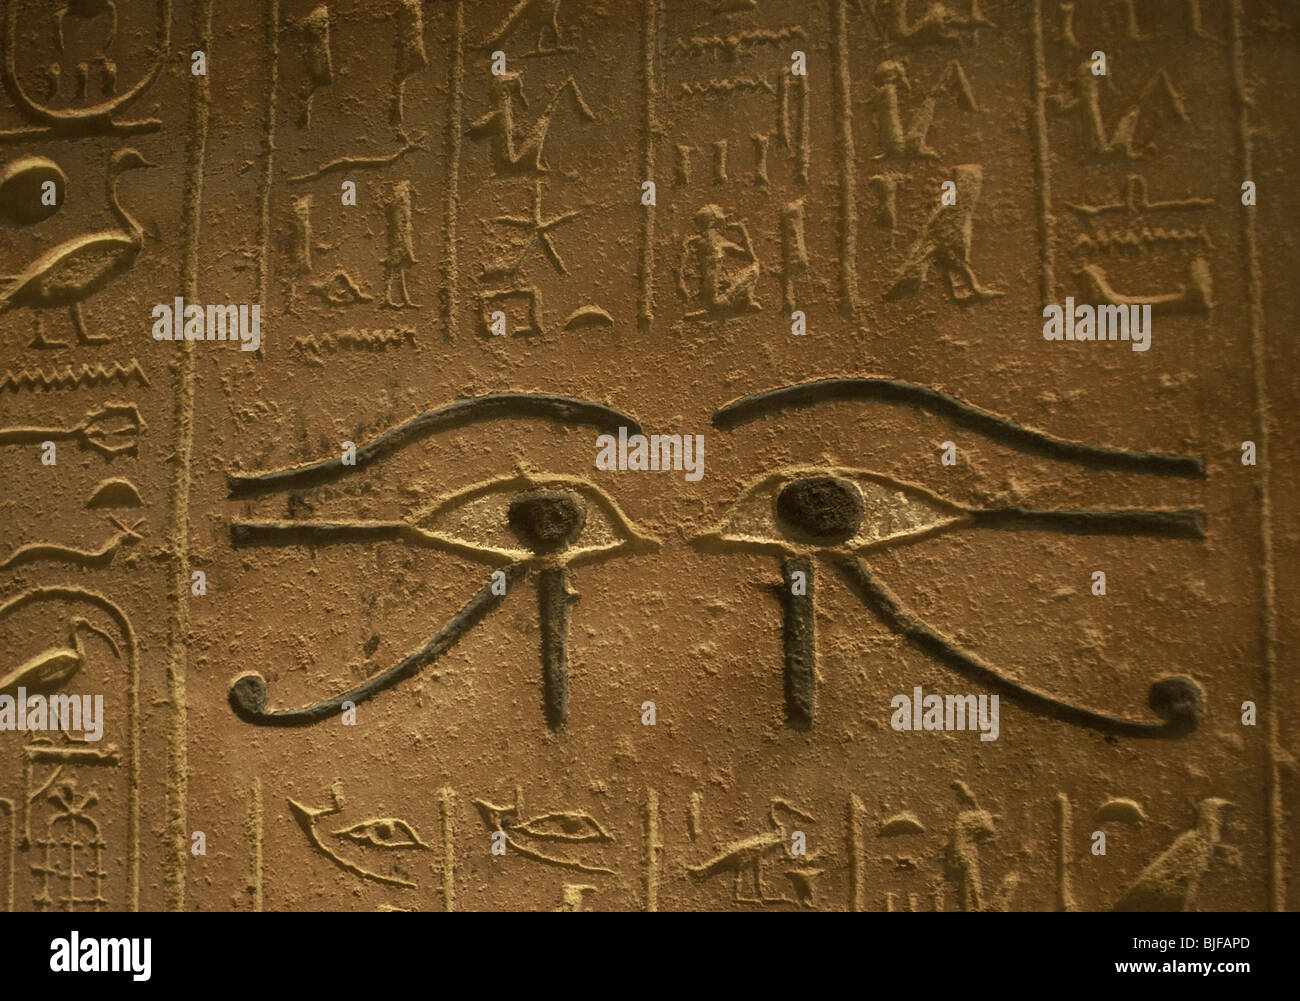 Menjeperura Tutmosis or Thutmose IV (1400-1301 b.C.) tomb. The two eyes of Horus. Valley of the Kings. Egypt. Stock Photo